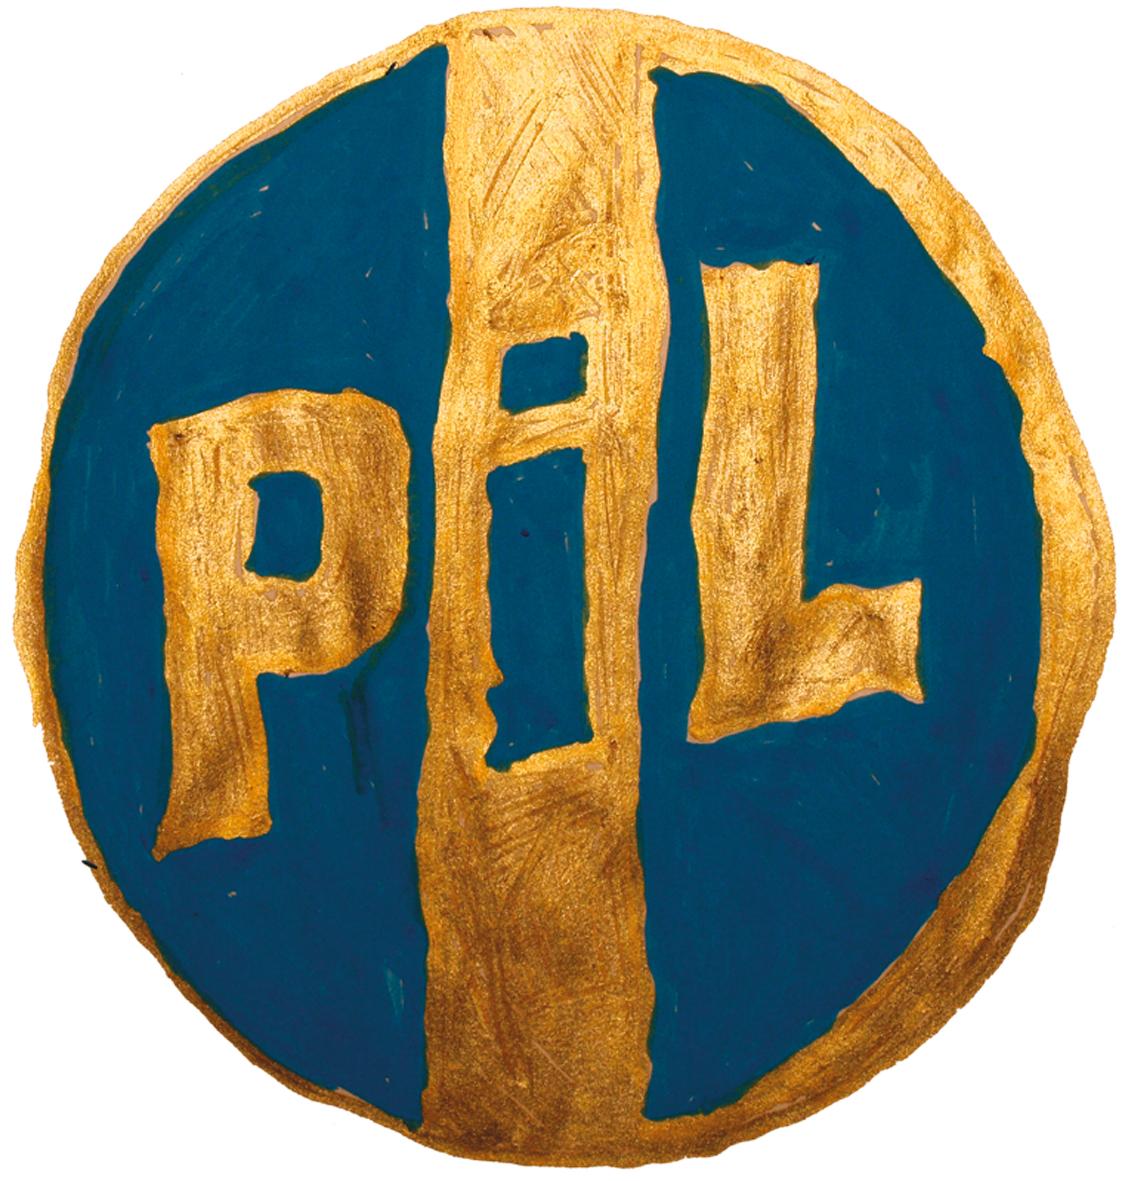 Public Image LTD to perform in Coventry this September